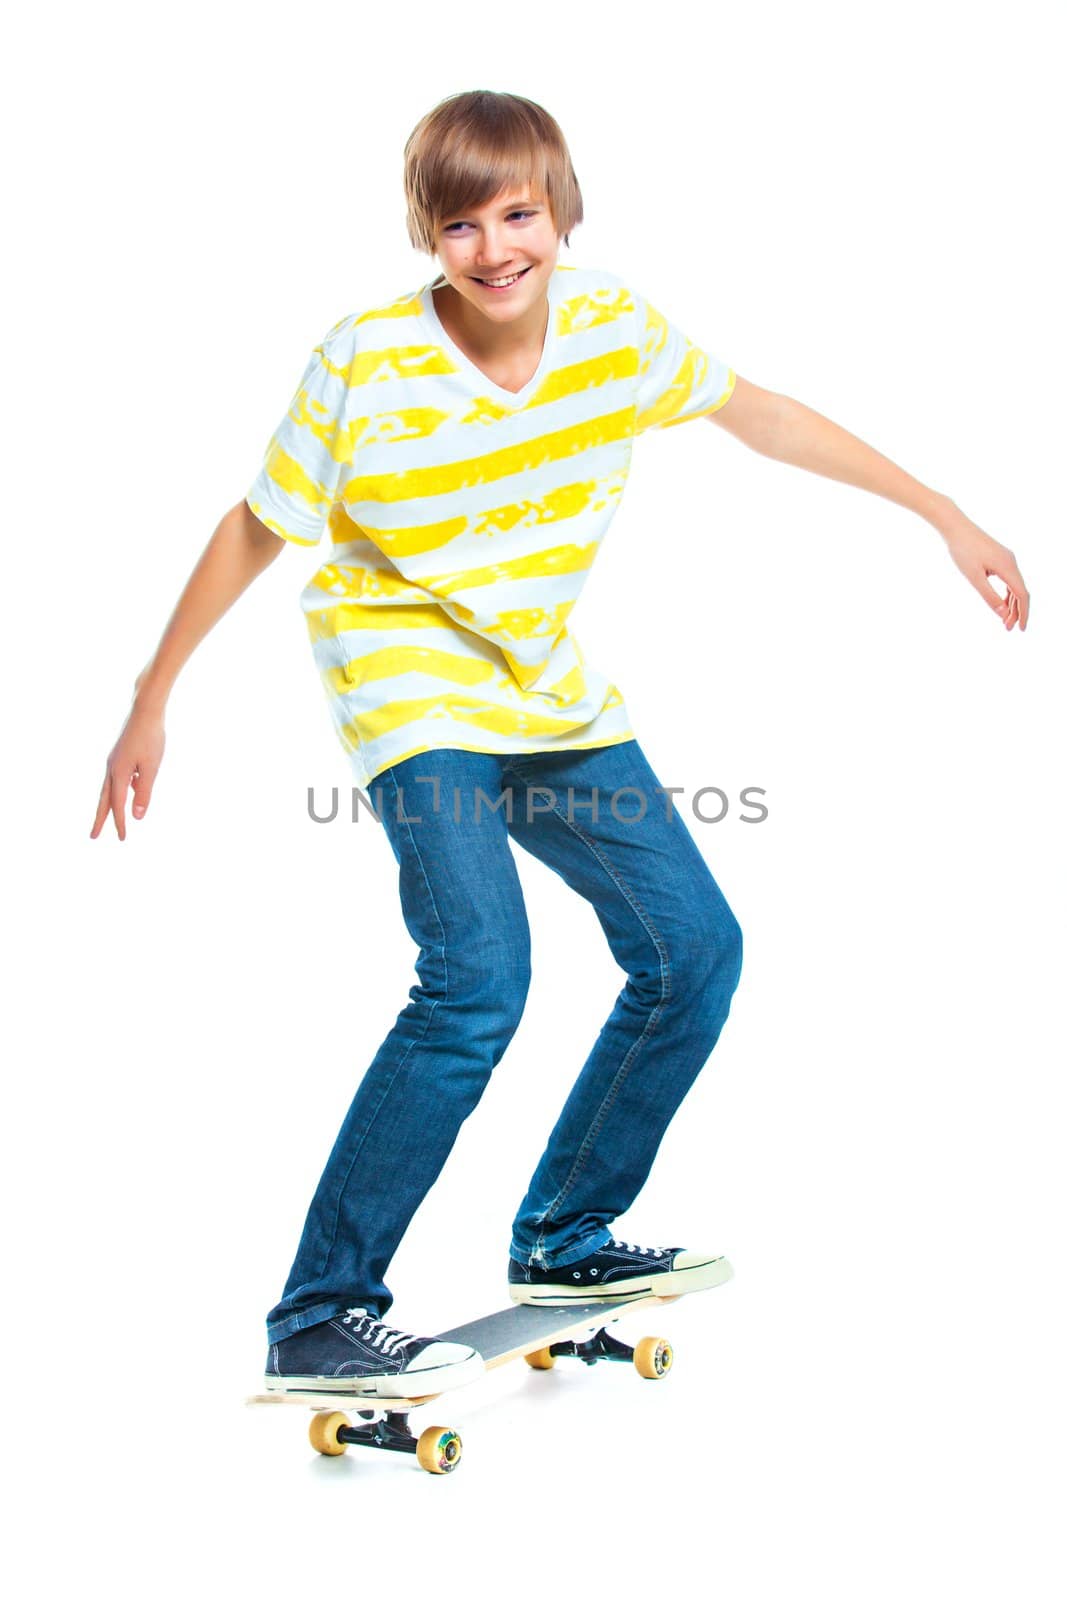 cute teenger blond boy on standing on skateboard isolated on white background